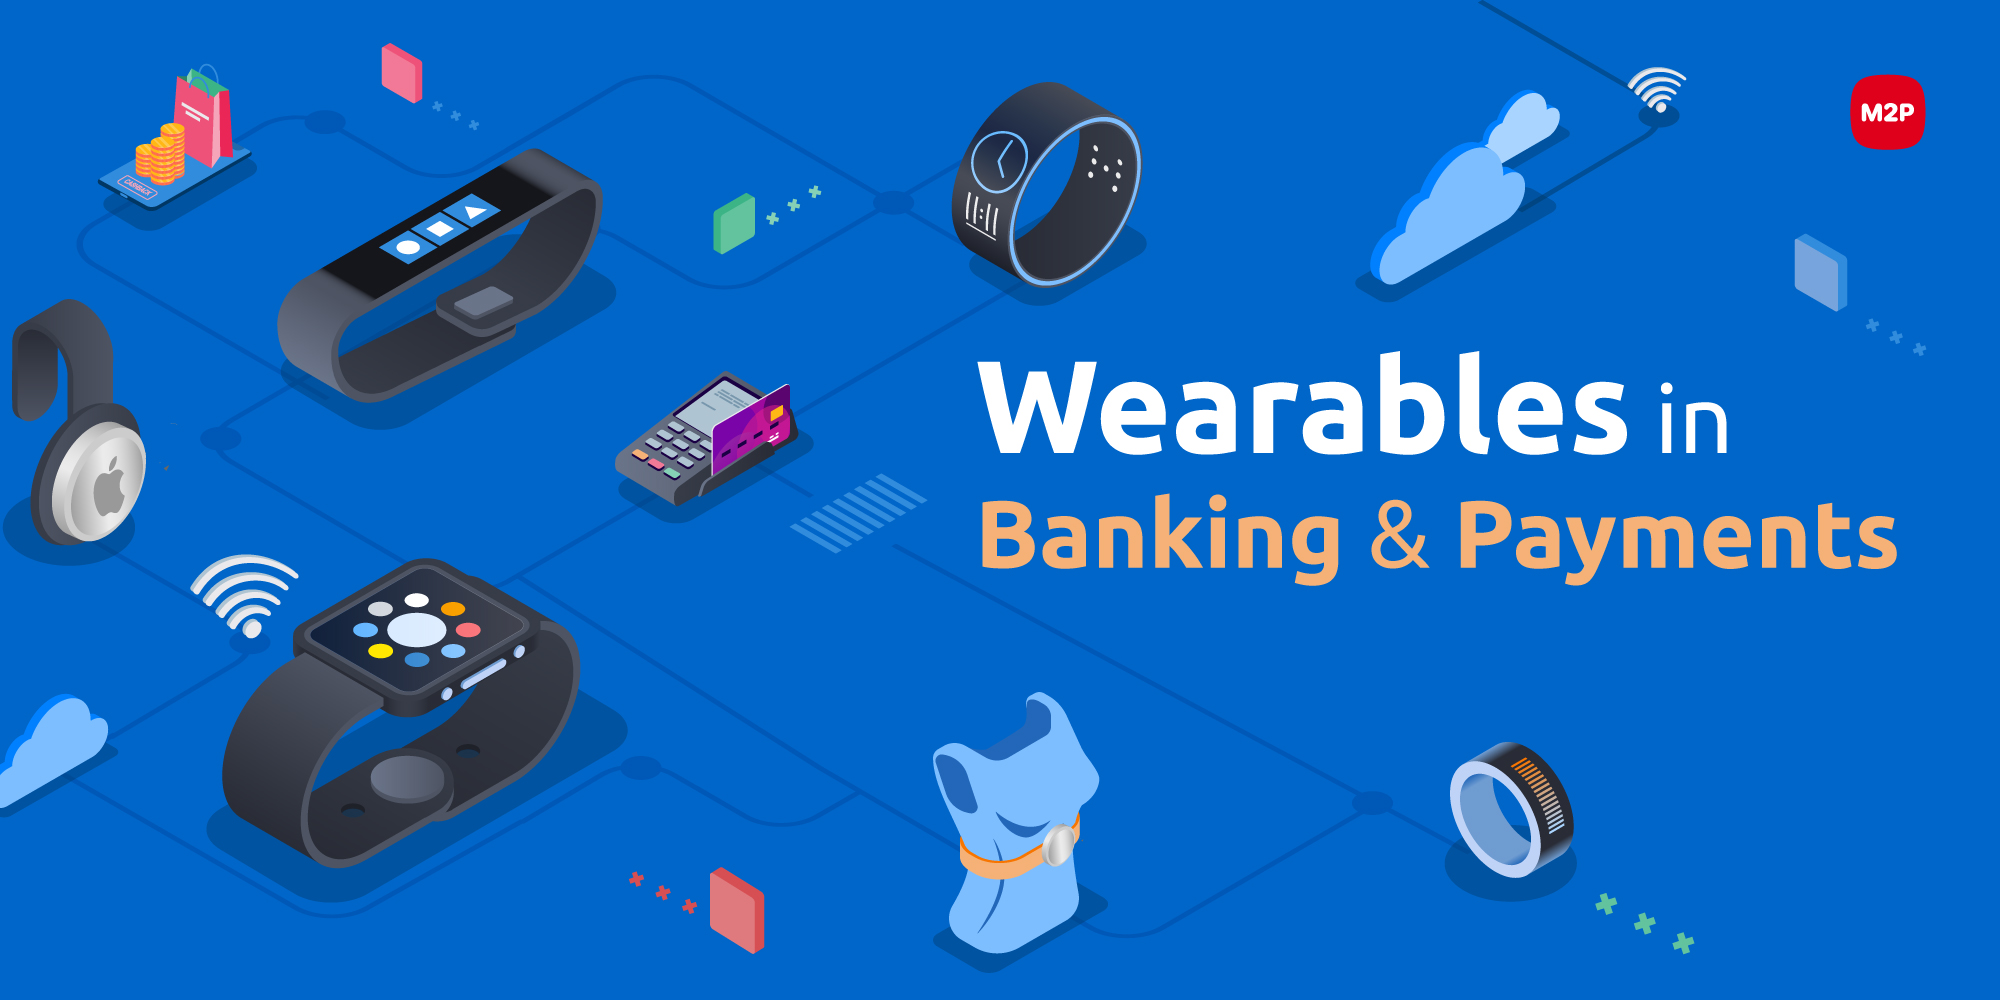 Rise of Wearables in Payments and Banking